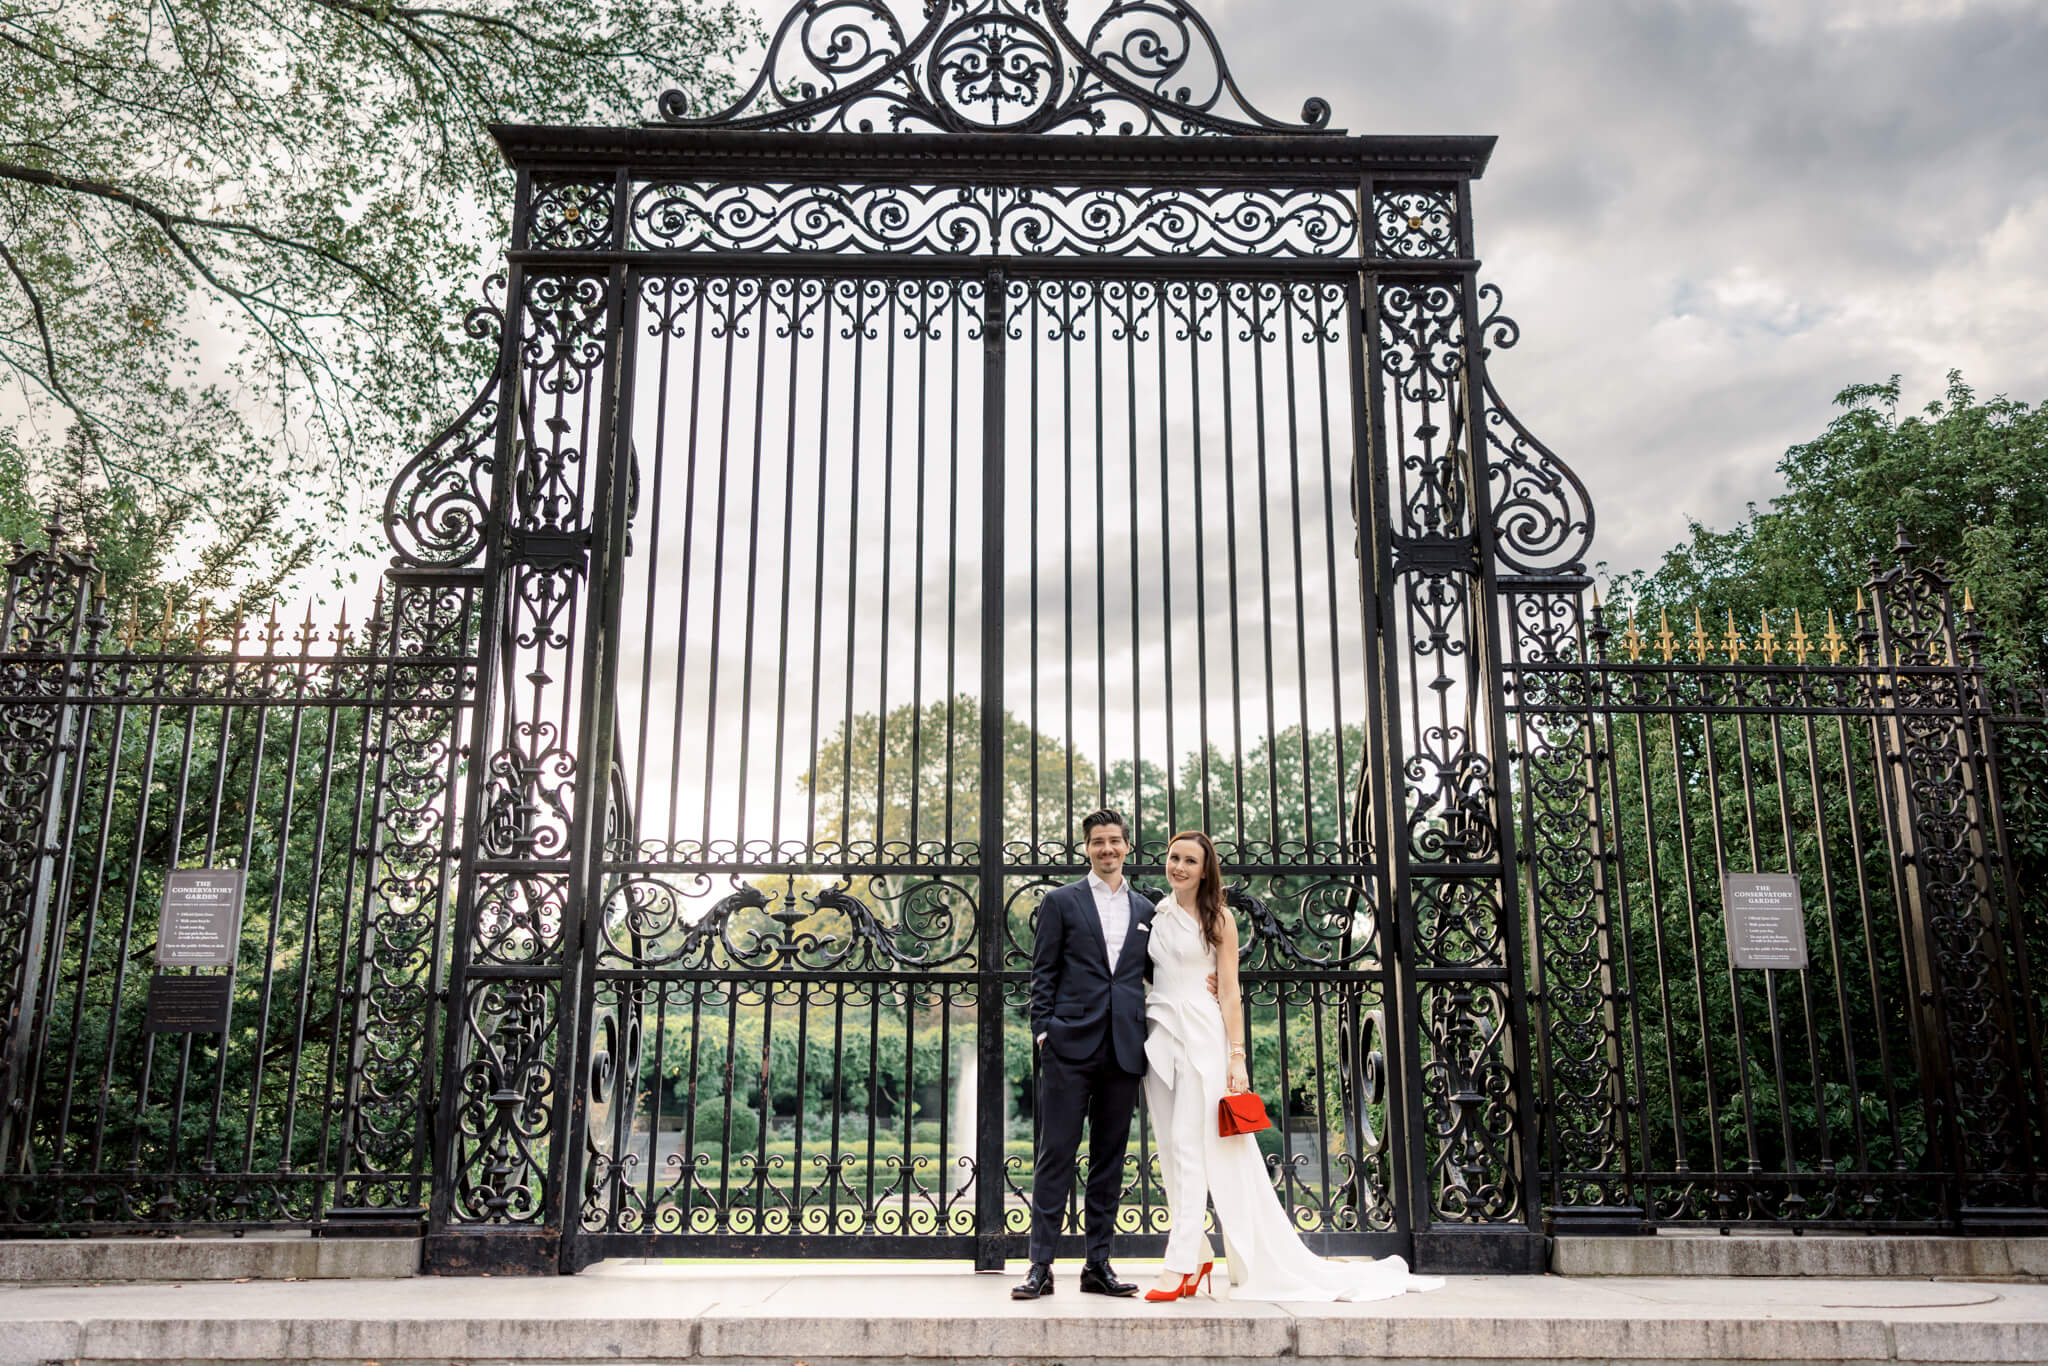 The bride and groom are standing in front of the very large gate of the Conservatory Garden. Image by Jenny Fu Studio